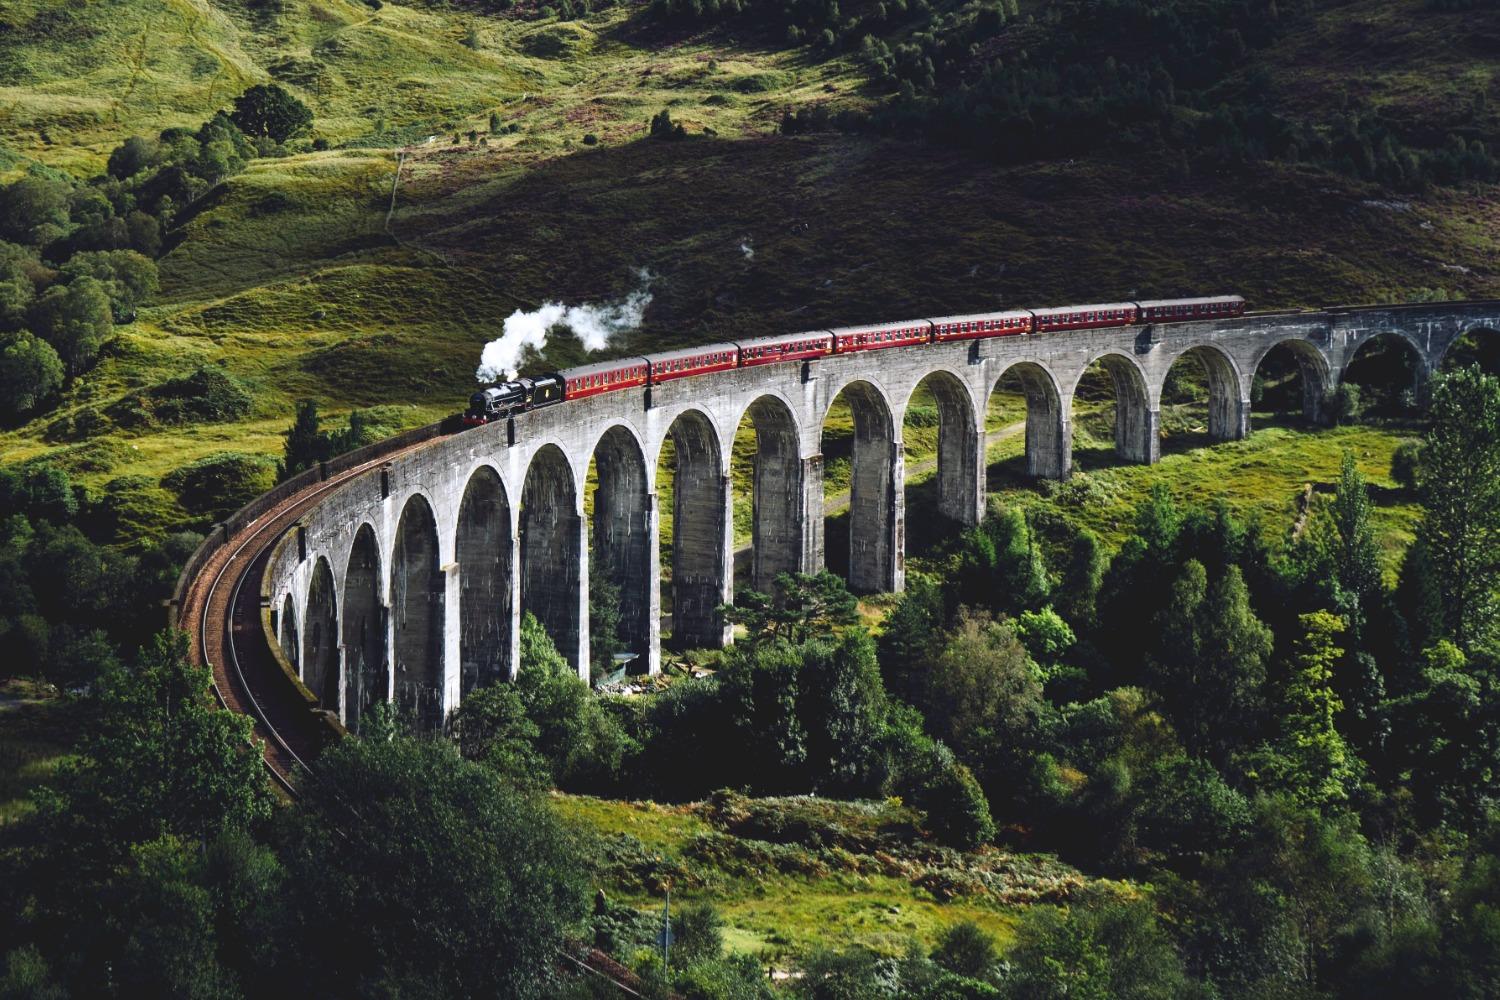 A train on the Glenfinnan Viaduct in the Scottish Highlands